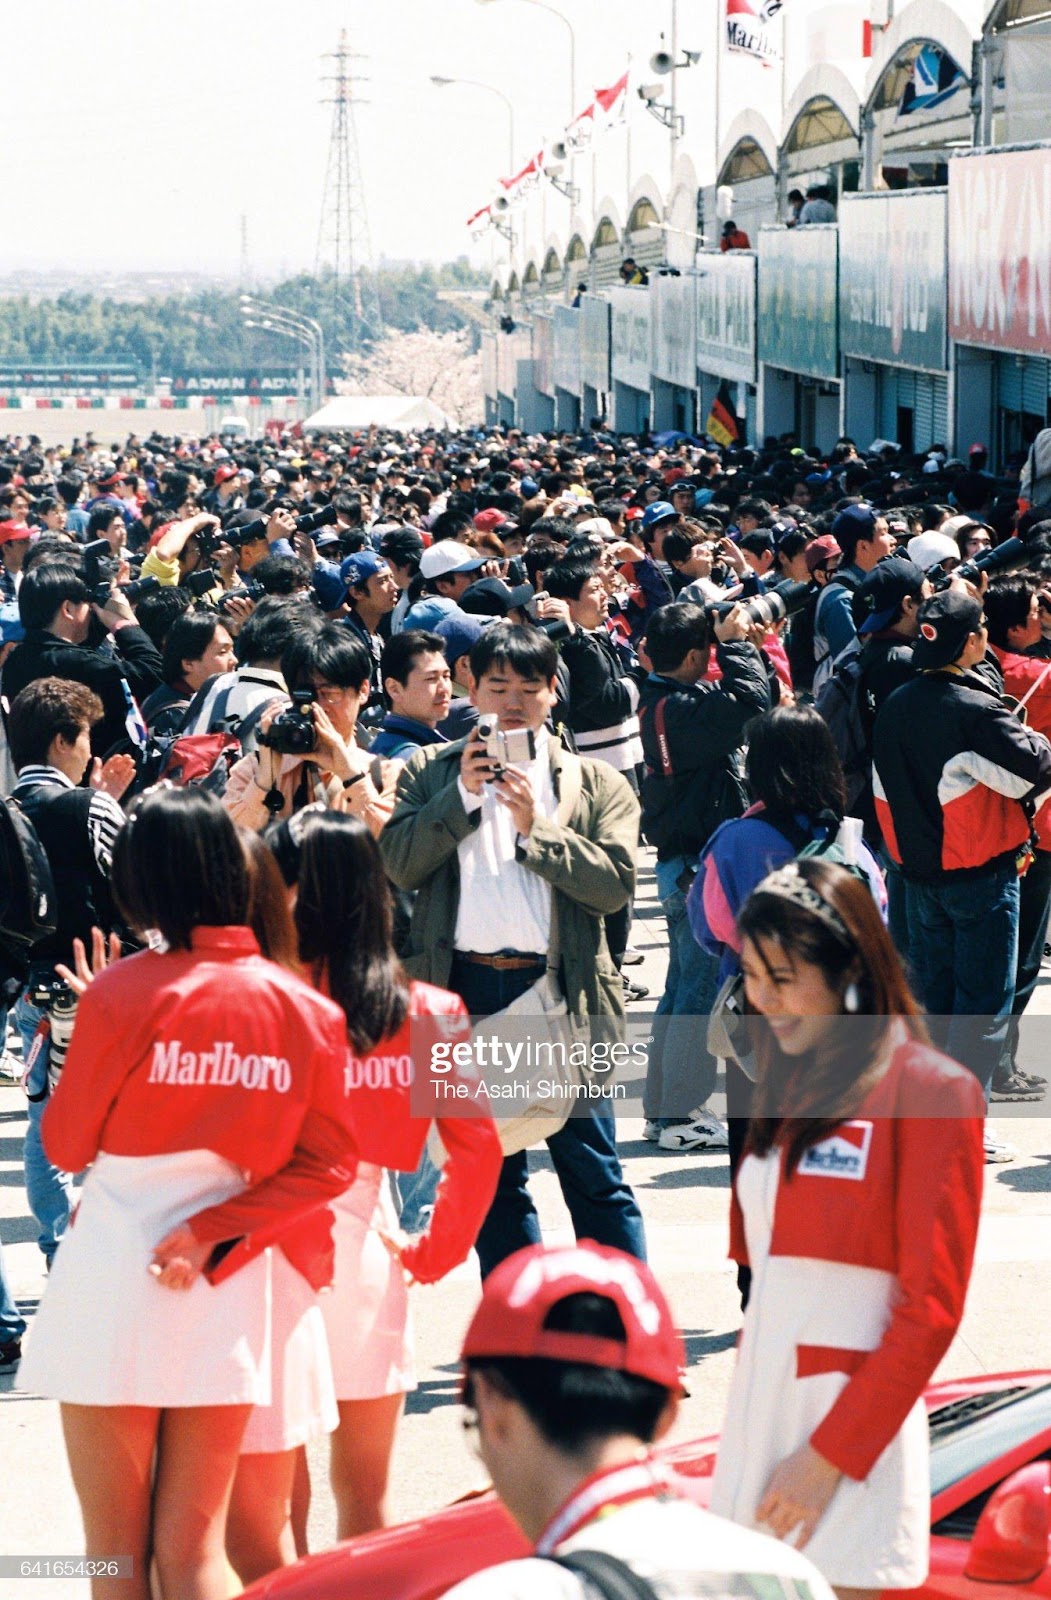 C:\Users\Valerio\Desktop\grid-girls-wave-to-fans-in-a-paddock-during-the-qualifying-of-the-picture-id641654326.jpg